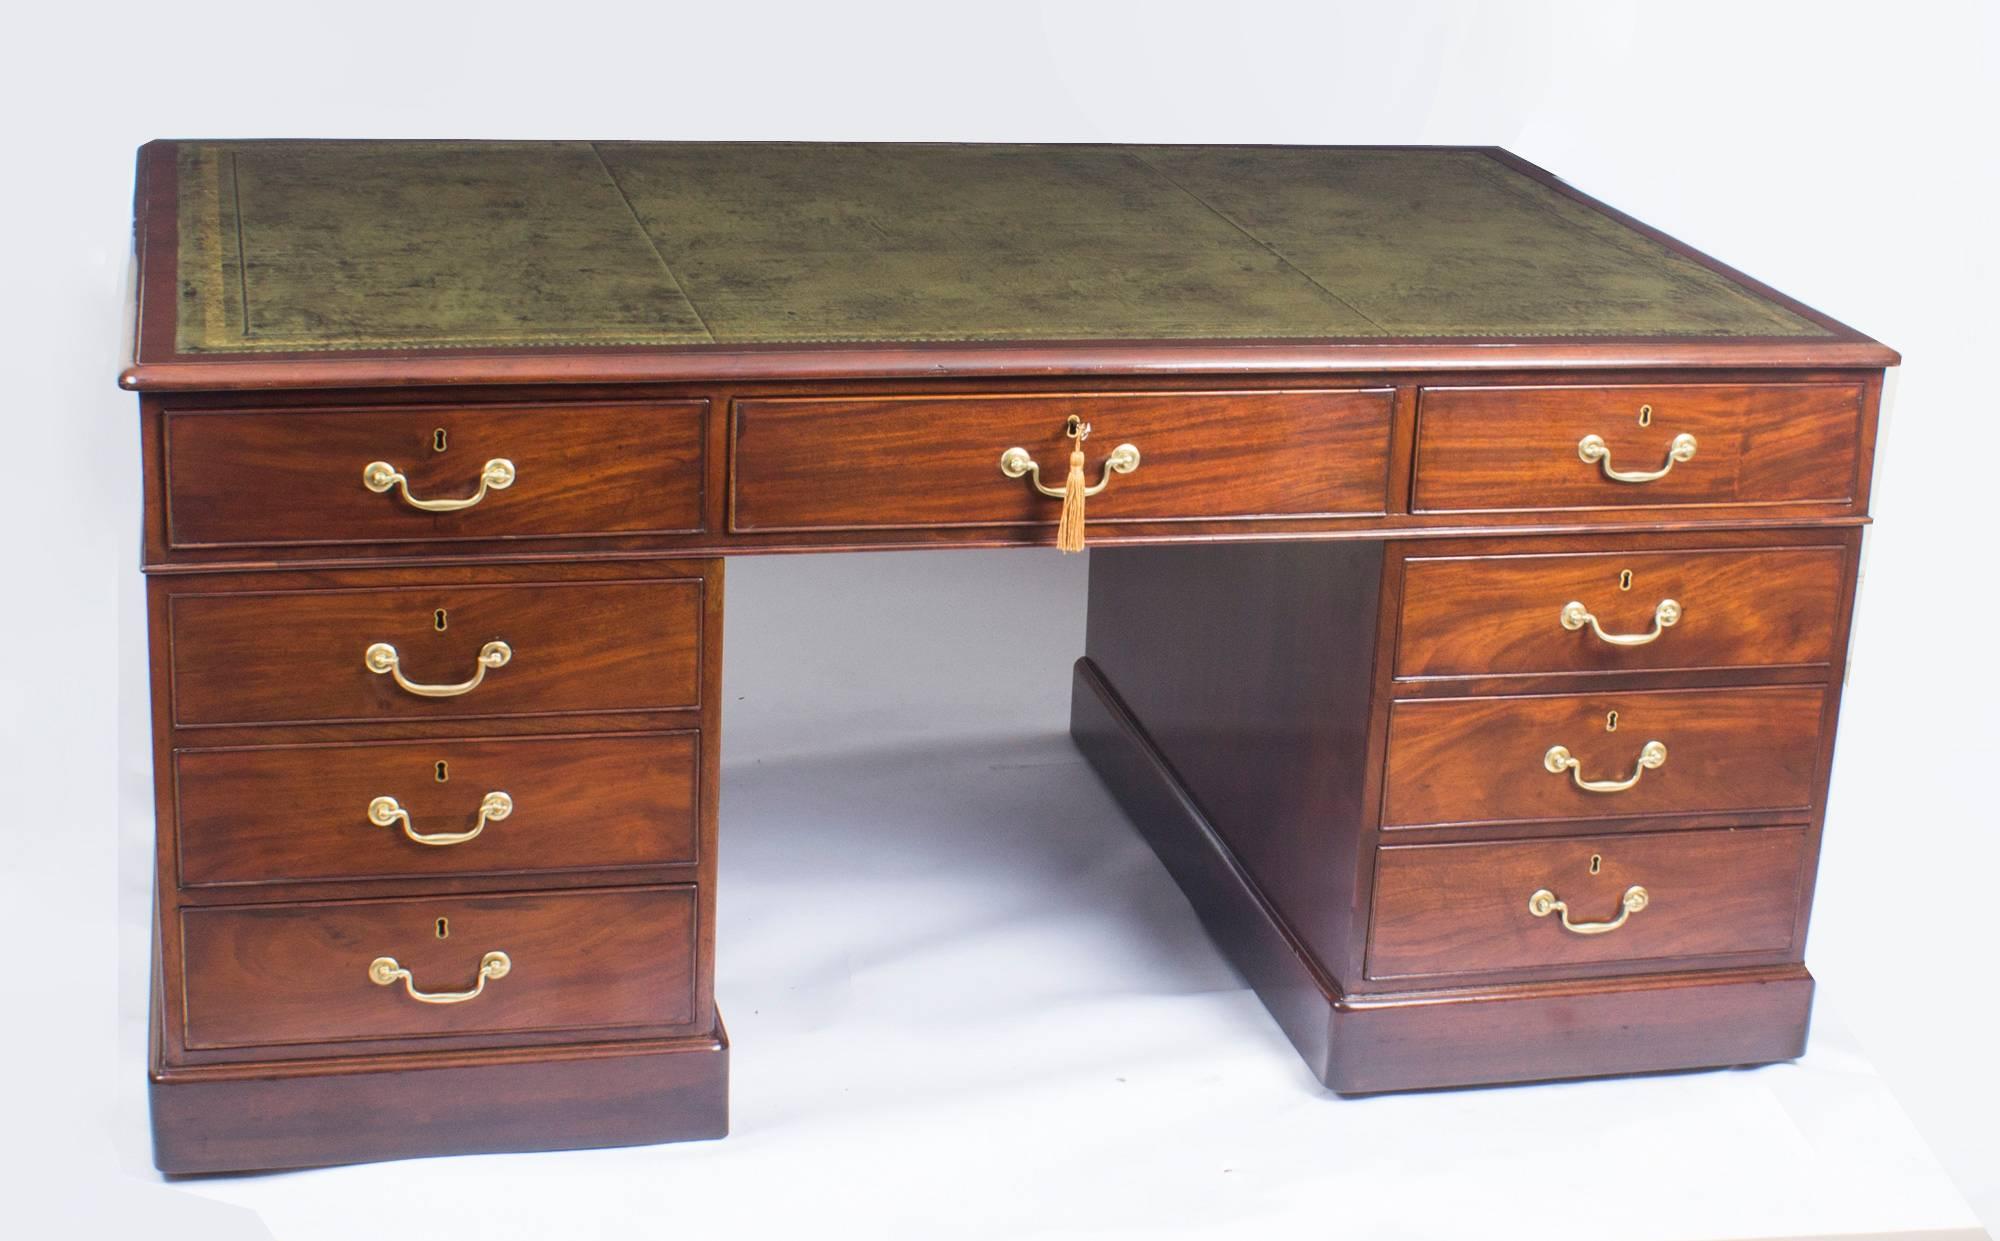 This is a beautiful antique George III flame mahogany partners desk, with nine drawers on each side, circa 1820 in date.

The desk is a partners desk so it is fitted with three frieze drawers and six further pedestal drawers on each side. The top